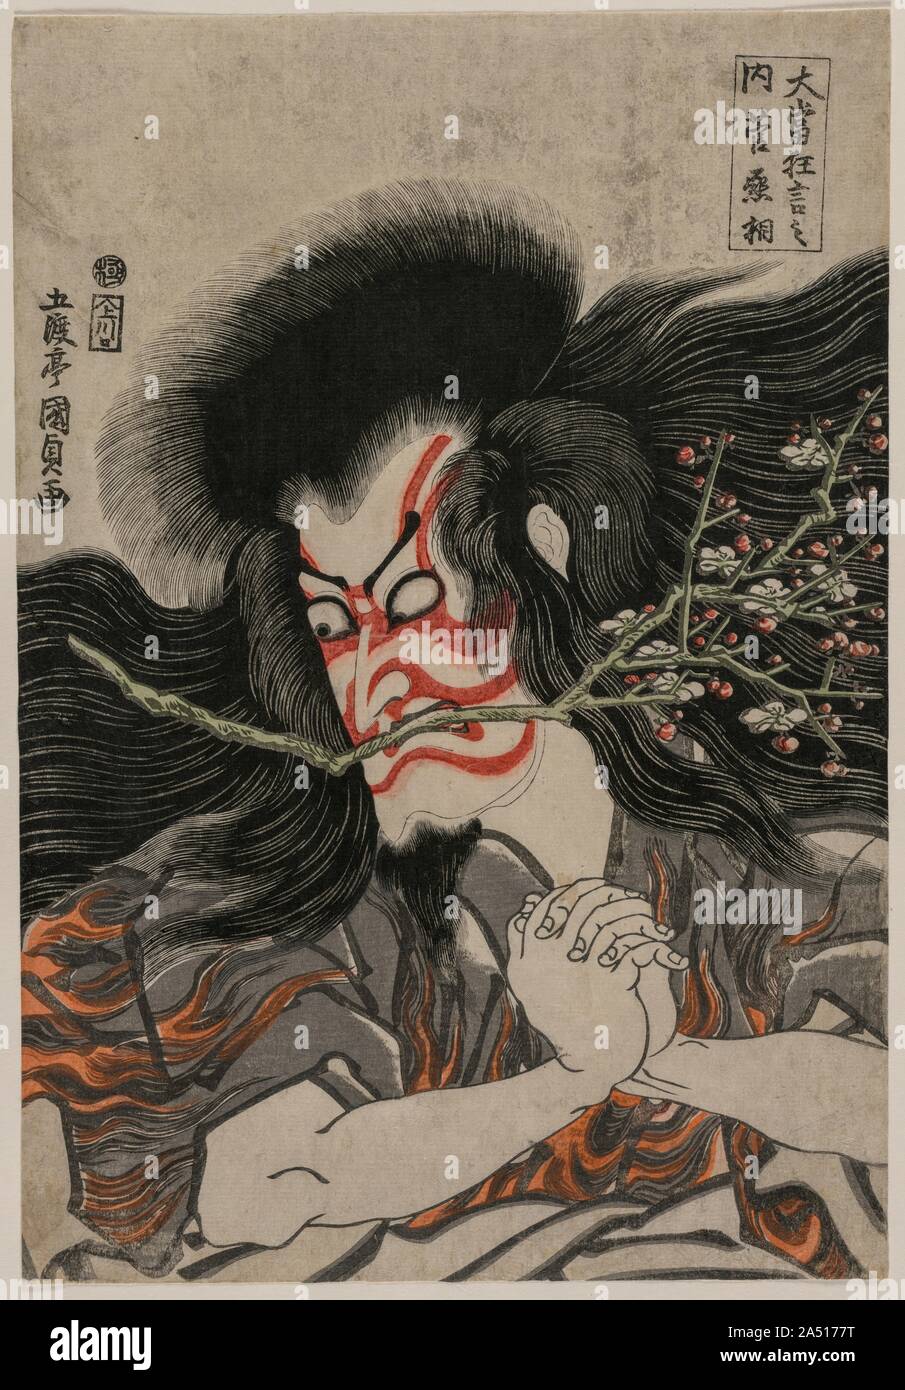 Ichikawa Danjuro VII as Kan Shojo in the Mt. Tenpai Scene (from the series Famous Kabuki Plays), 1814. Here, the actor plays the role of an exiled statesman, transforming himself into a vengeful thunder god. The red-and-white make-up style&#x2014; kumadori , or &quot;shadow painting&quot;&#x2014;is characteristic of the  aragoto  manner of portraying heroic roles. The crossed eyes and clenched mouth&#x2014;in this role a plum blossom branch is added&#x2014;demonstrates the conventional  mie  pose used by Kabuki actors to express intense emotion at the most dramatic moment in the play. The audi Stock Photo